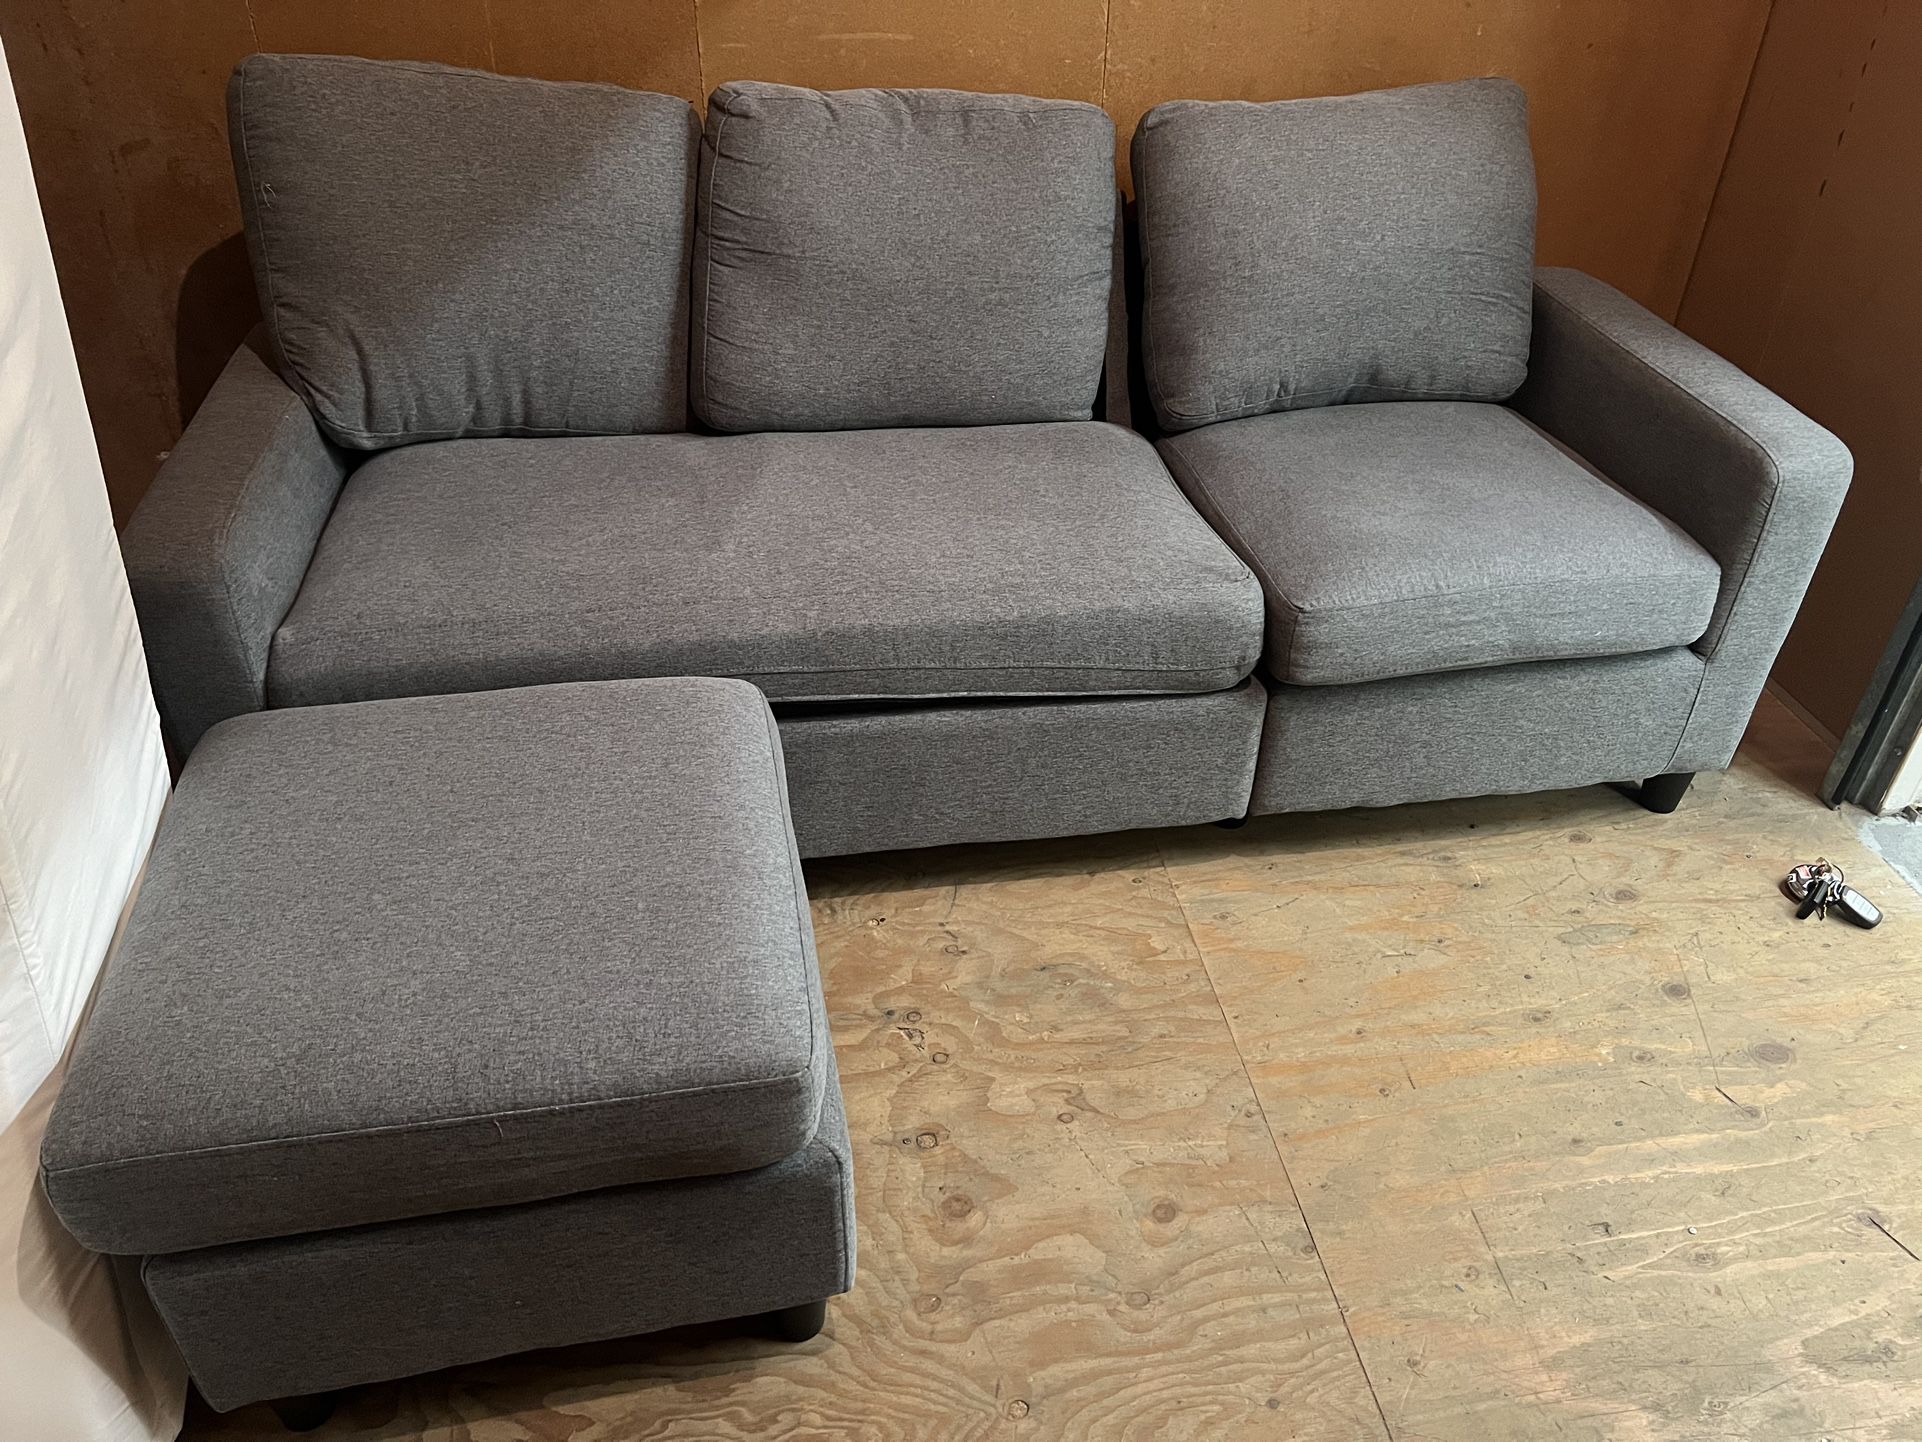 Campbelltown 2 Piece Upholstered Sectional